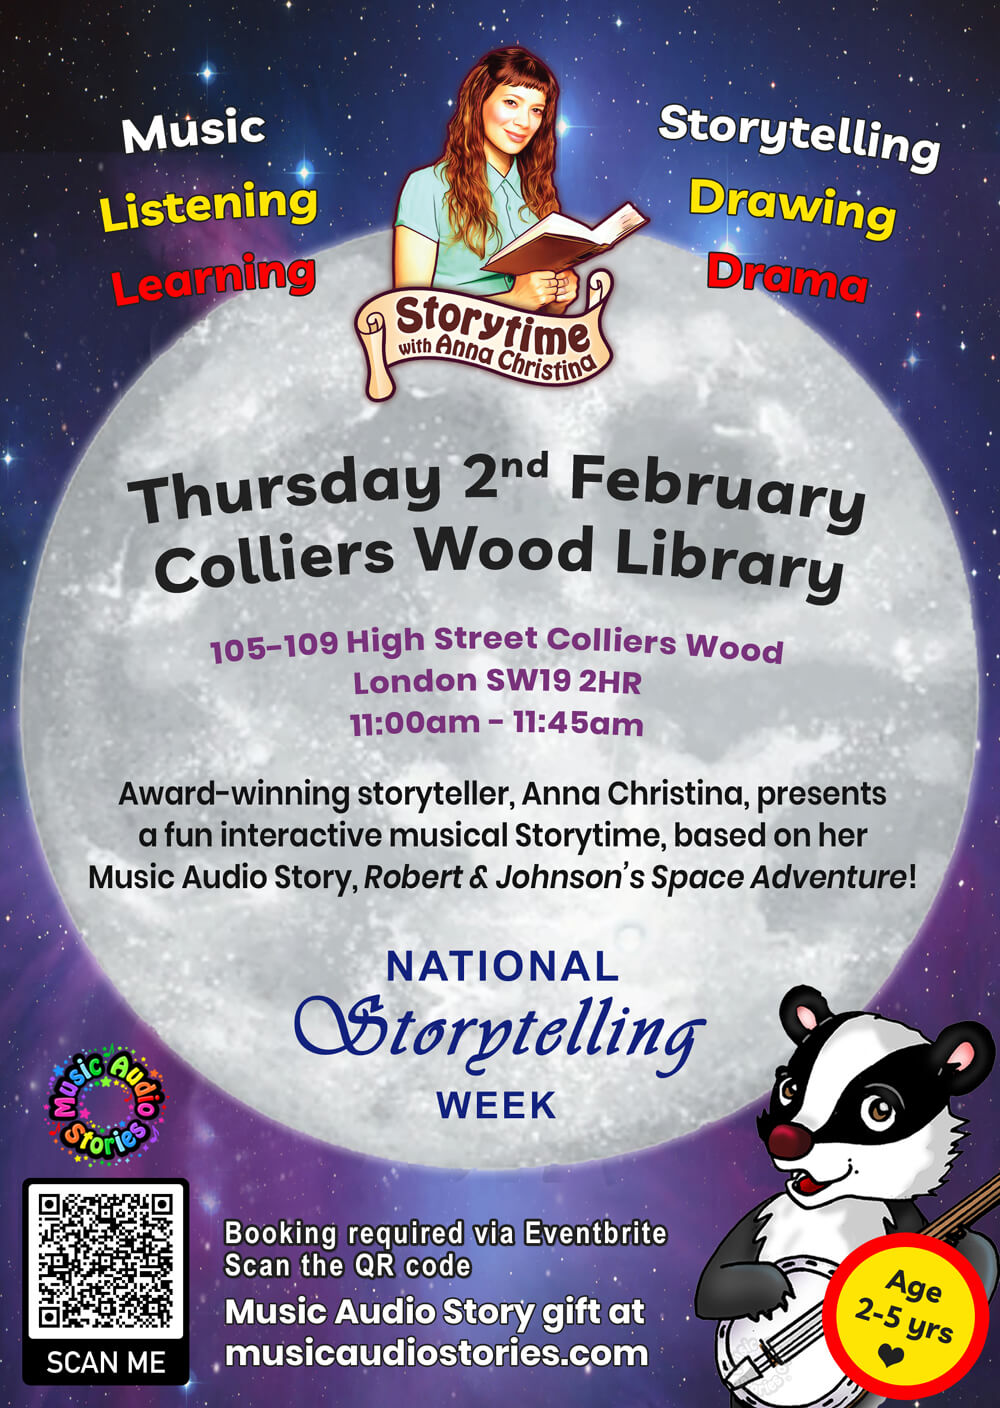 Storytime with Anna Christina at Colliers Wood Library - National Storytelling Week image